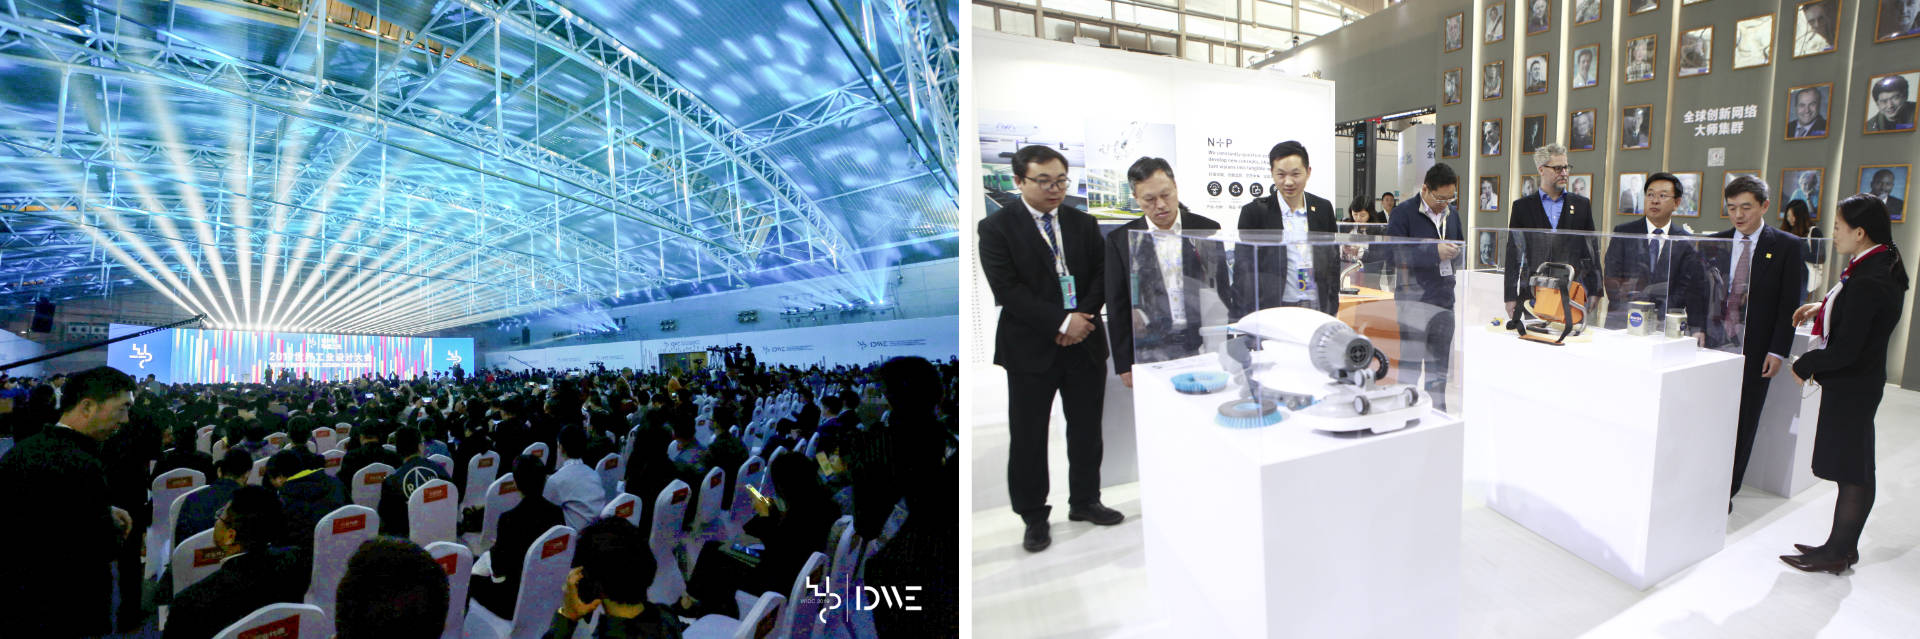 daniels + erdwiens industrial design exhibition on the World Industrial Design Conference 2019 in Yantai